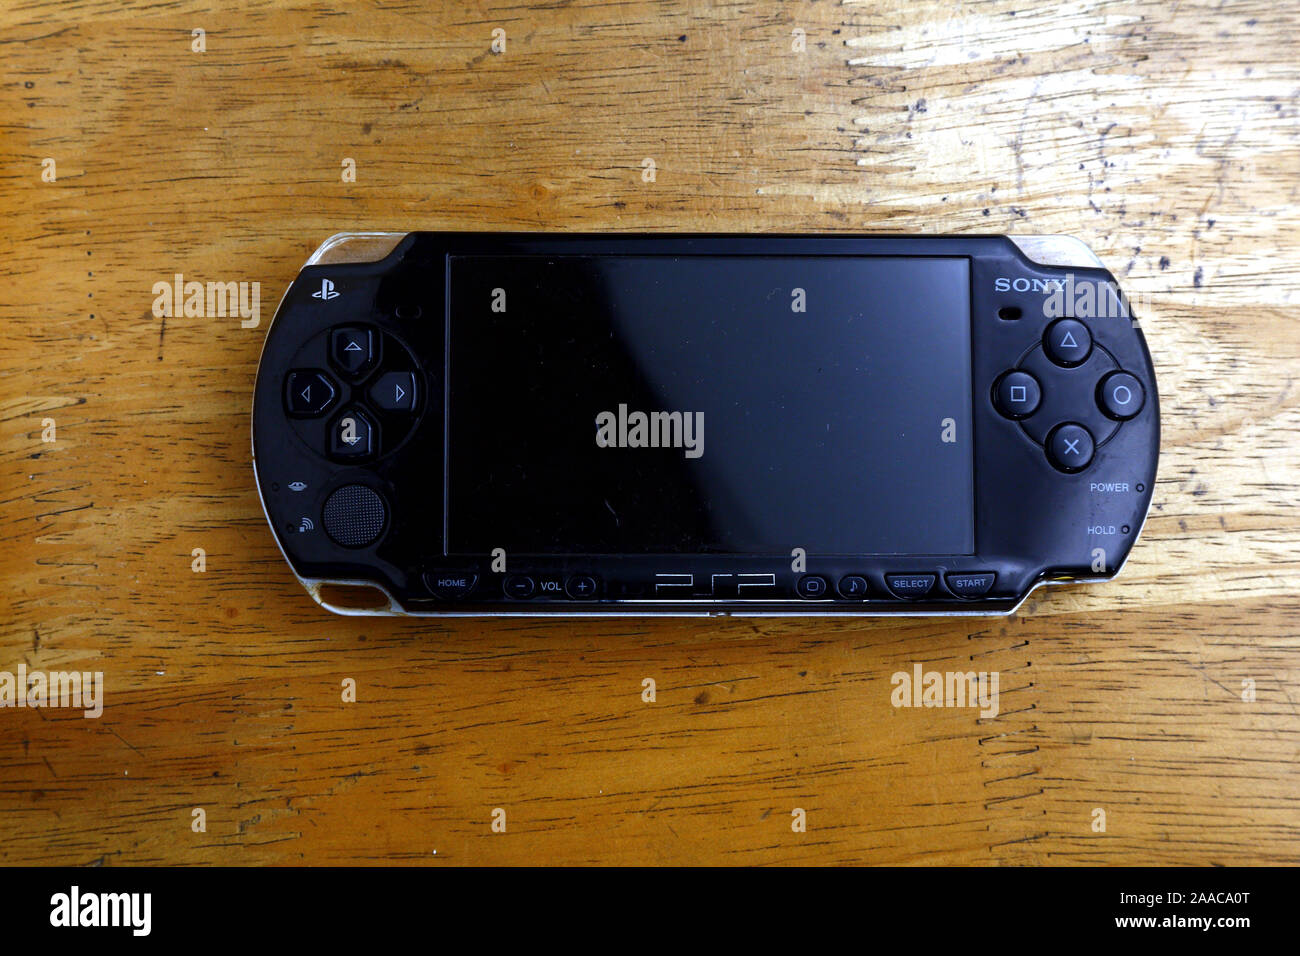 ANTIPOLO CITY, PHILIPPINES – NOVEMBER 20, 2019: Used and old portable game console on a table. Stock Photo